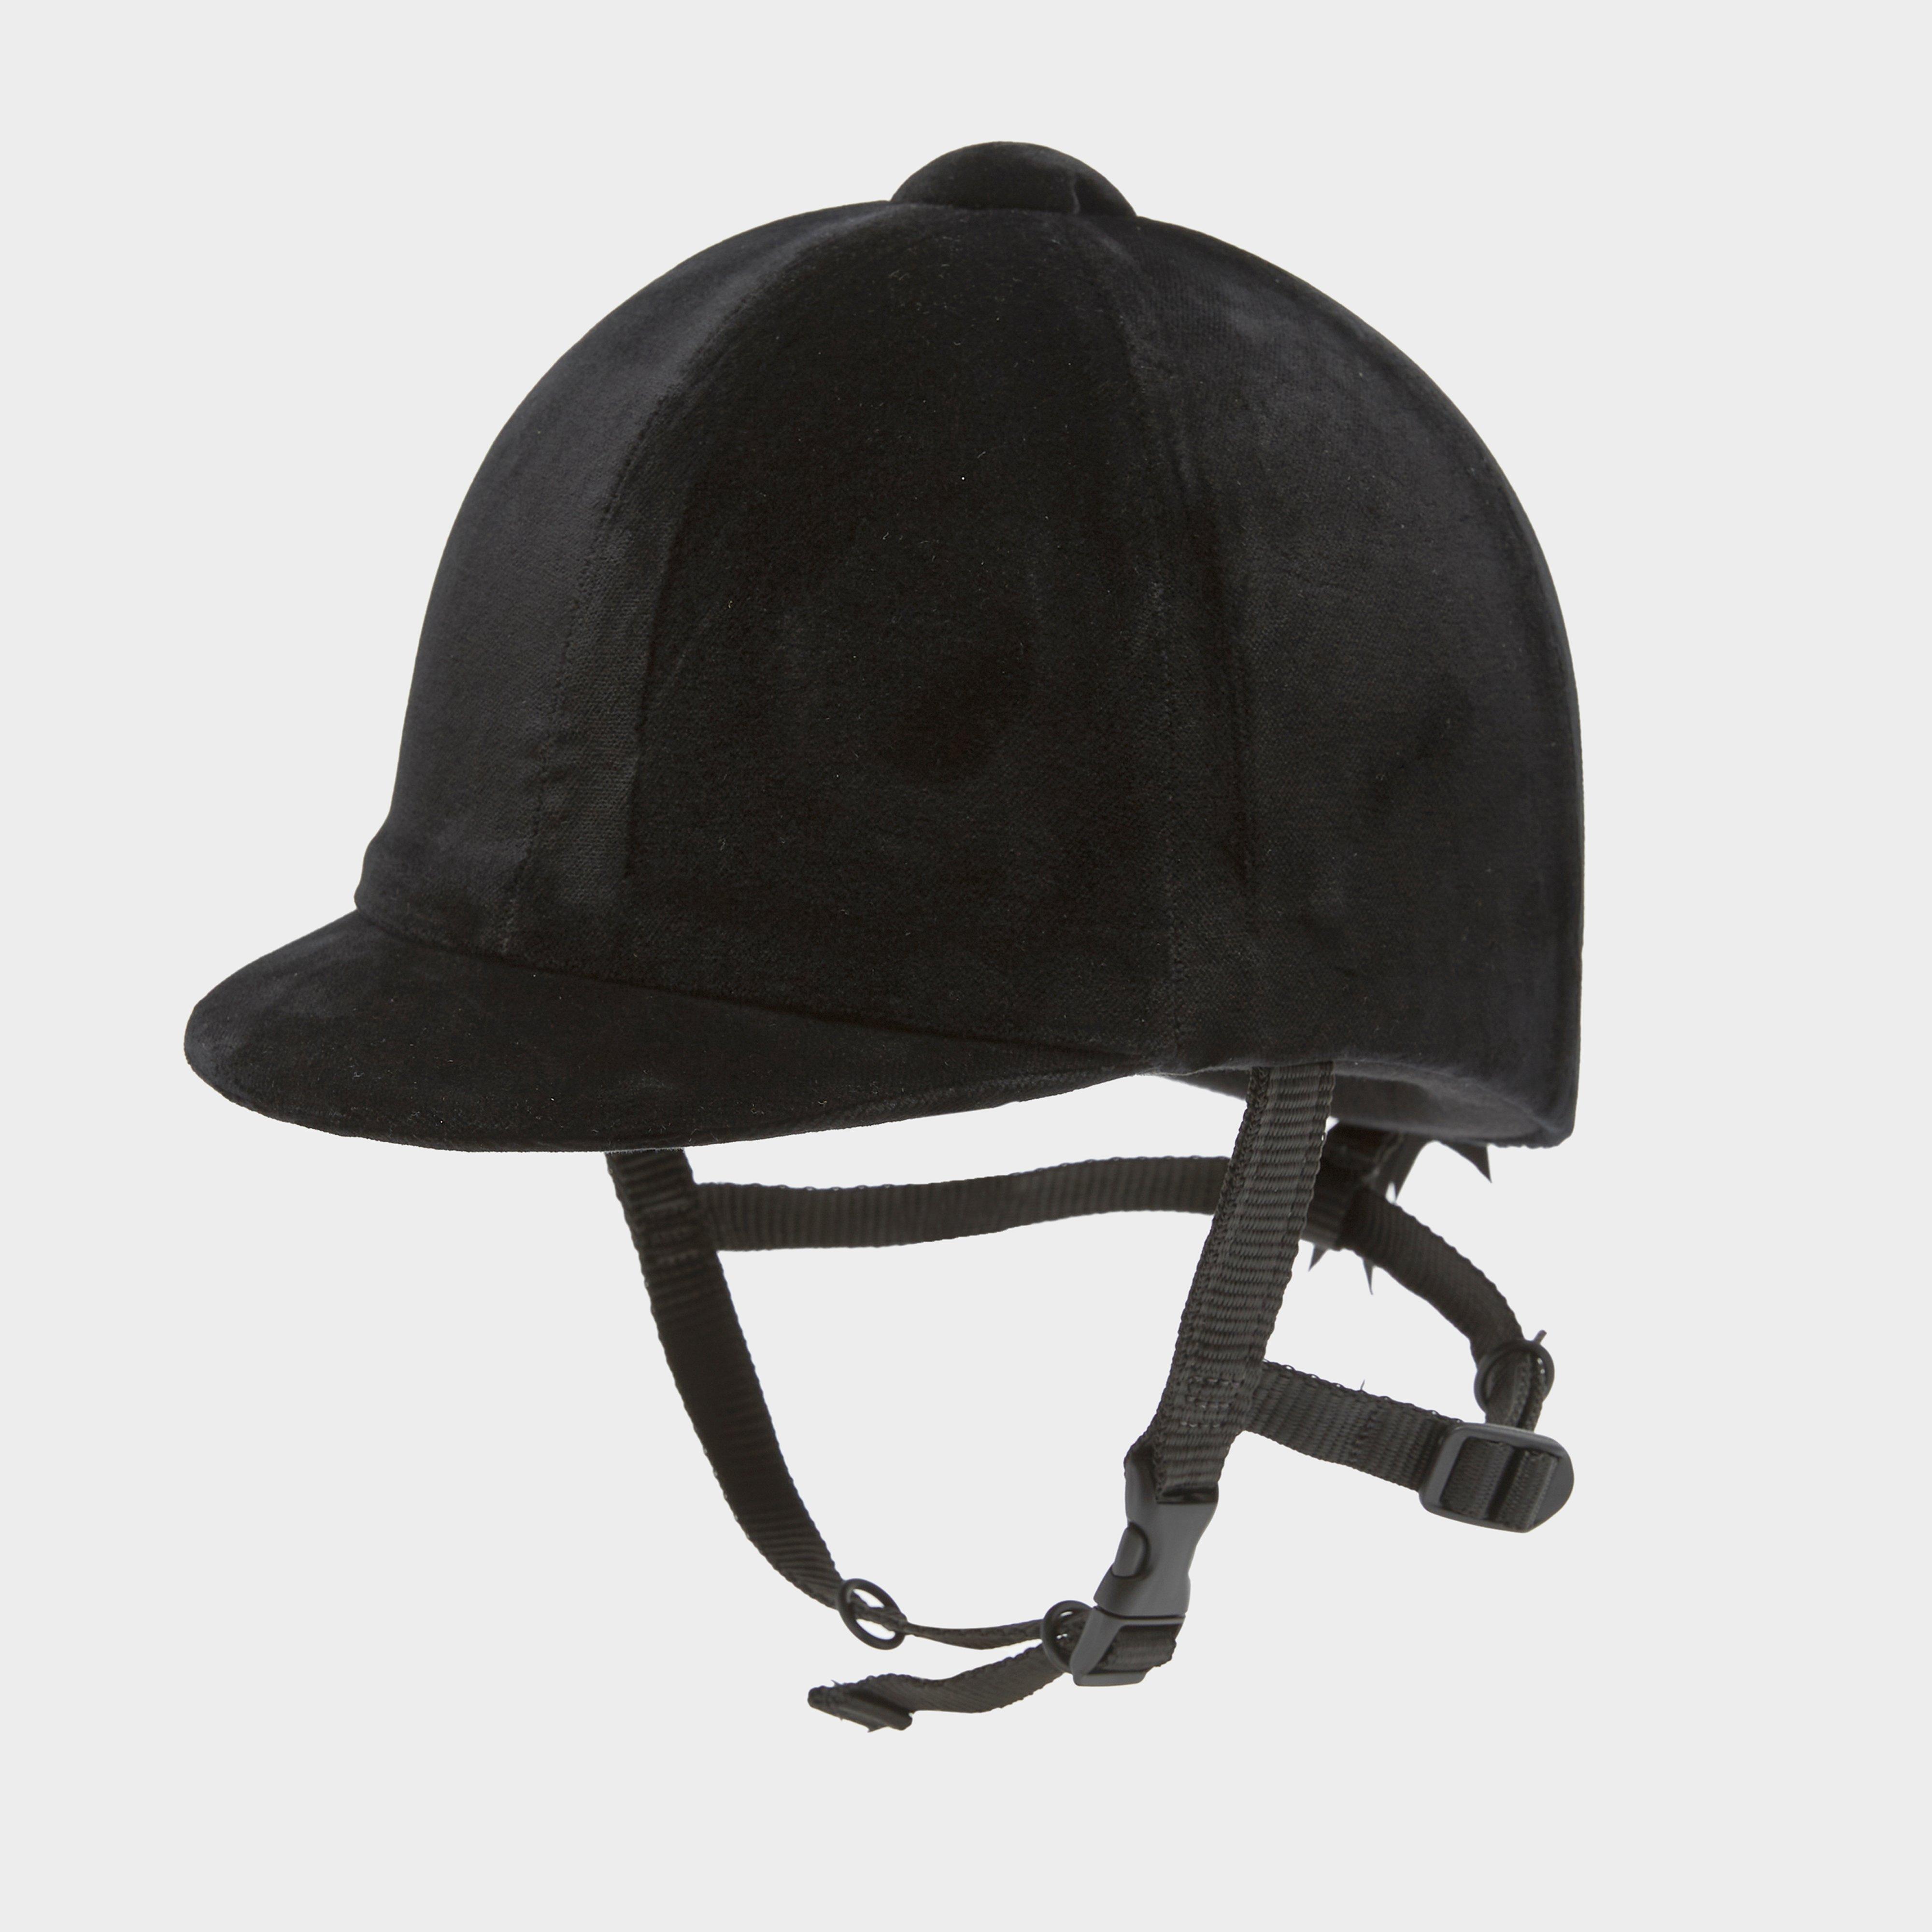  Champion CPX 3000 Riding Hat